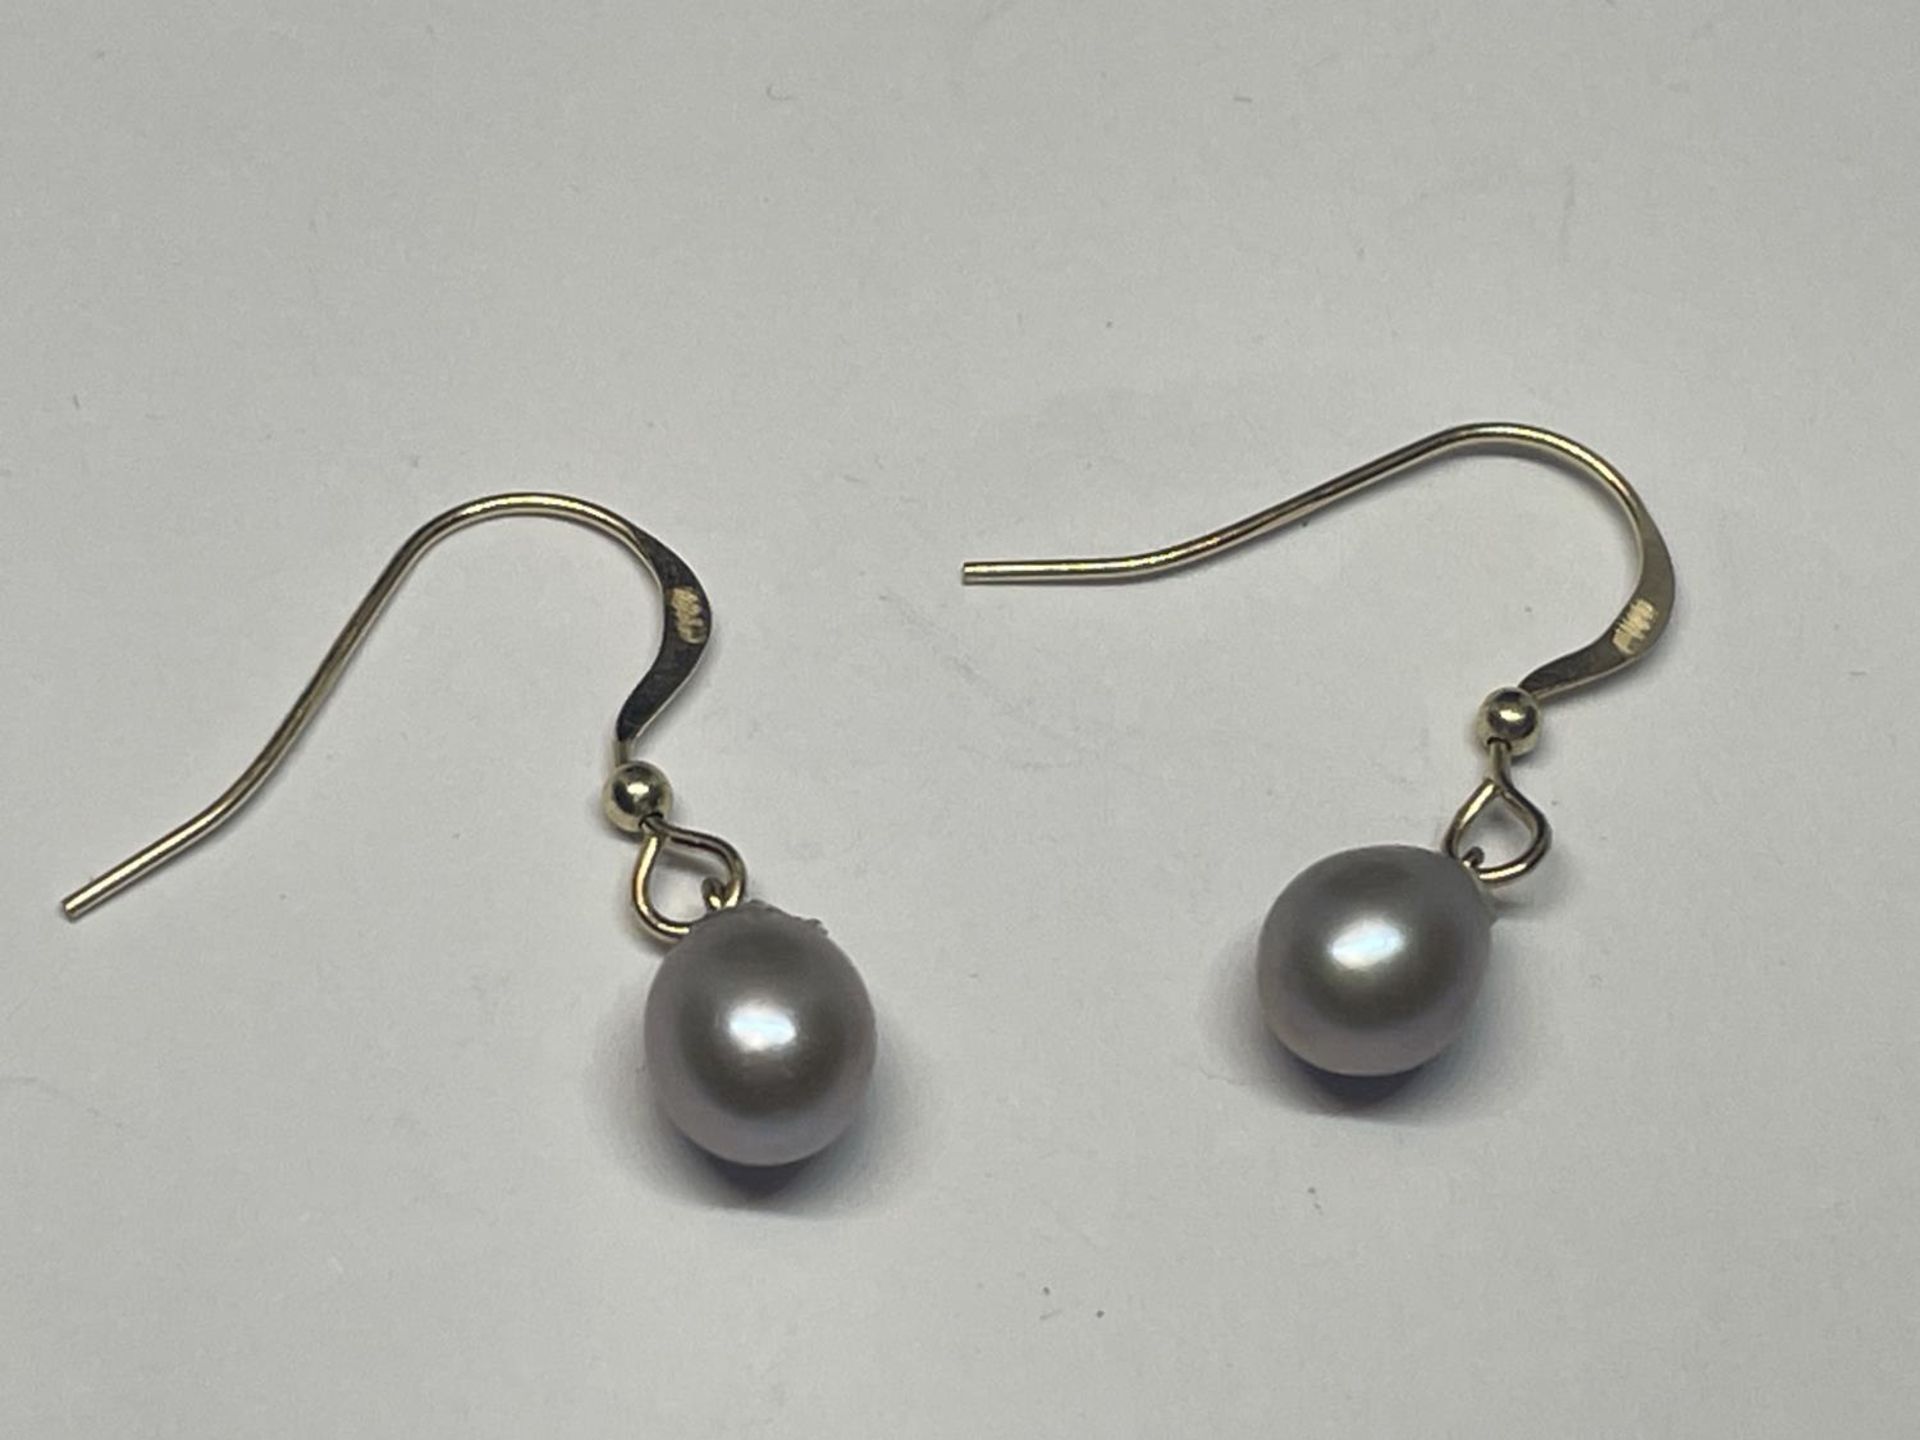 A PAIR OF 14 CARAT GOLD AND PEARL EARRING GROSS WEIGHT 1.18 GRAMS